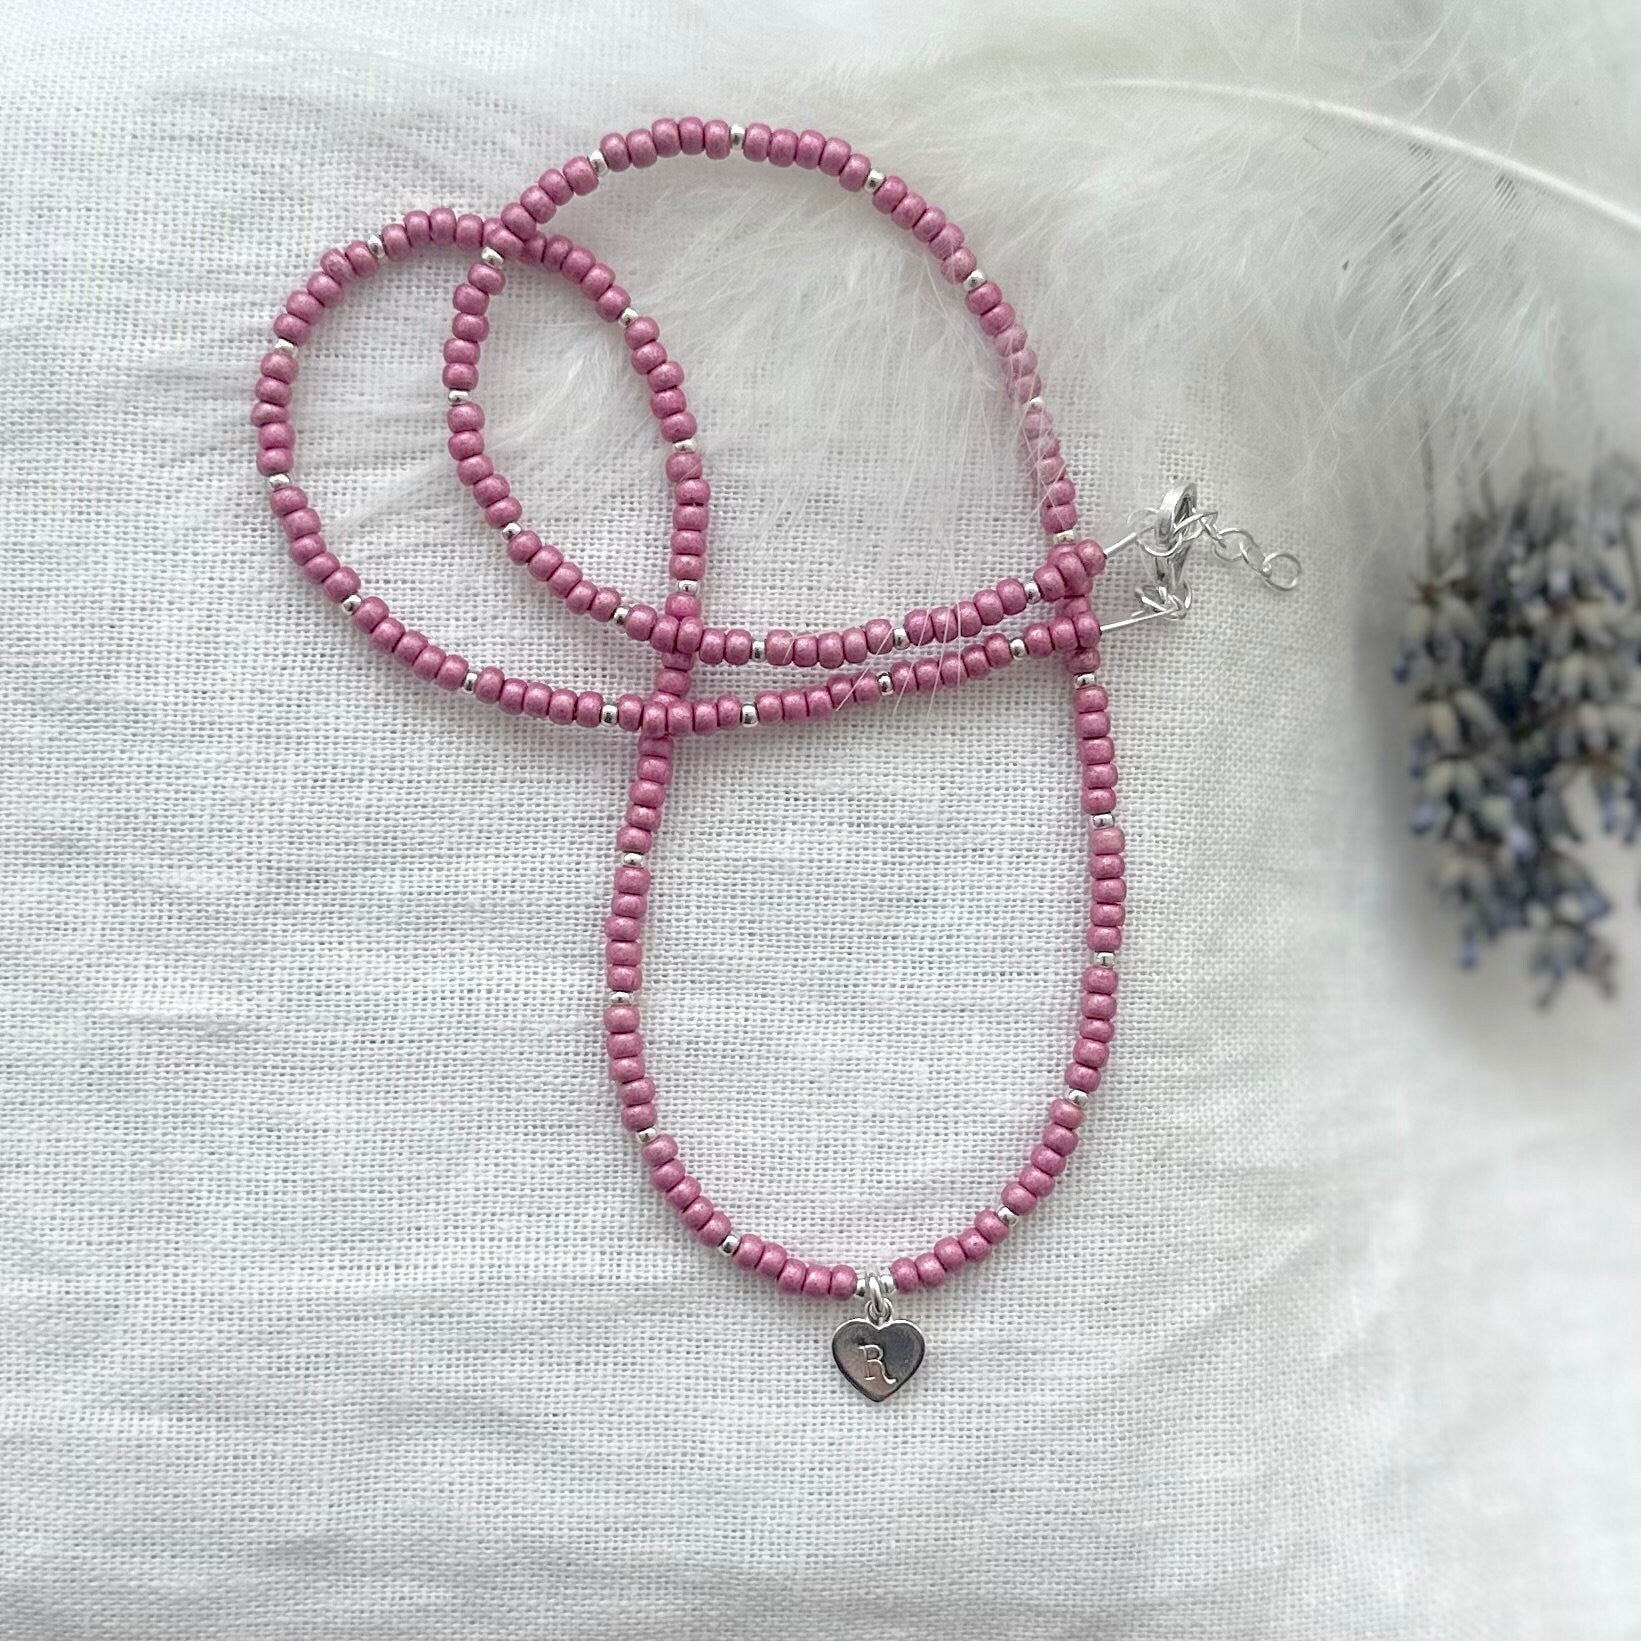 Initial necklace with seed beads of choice